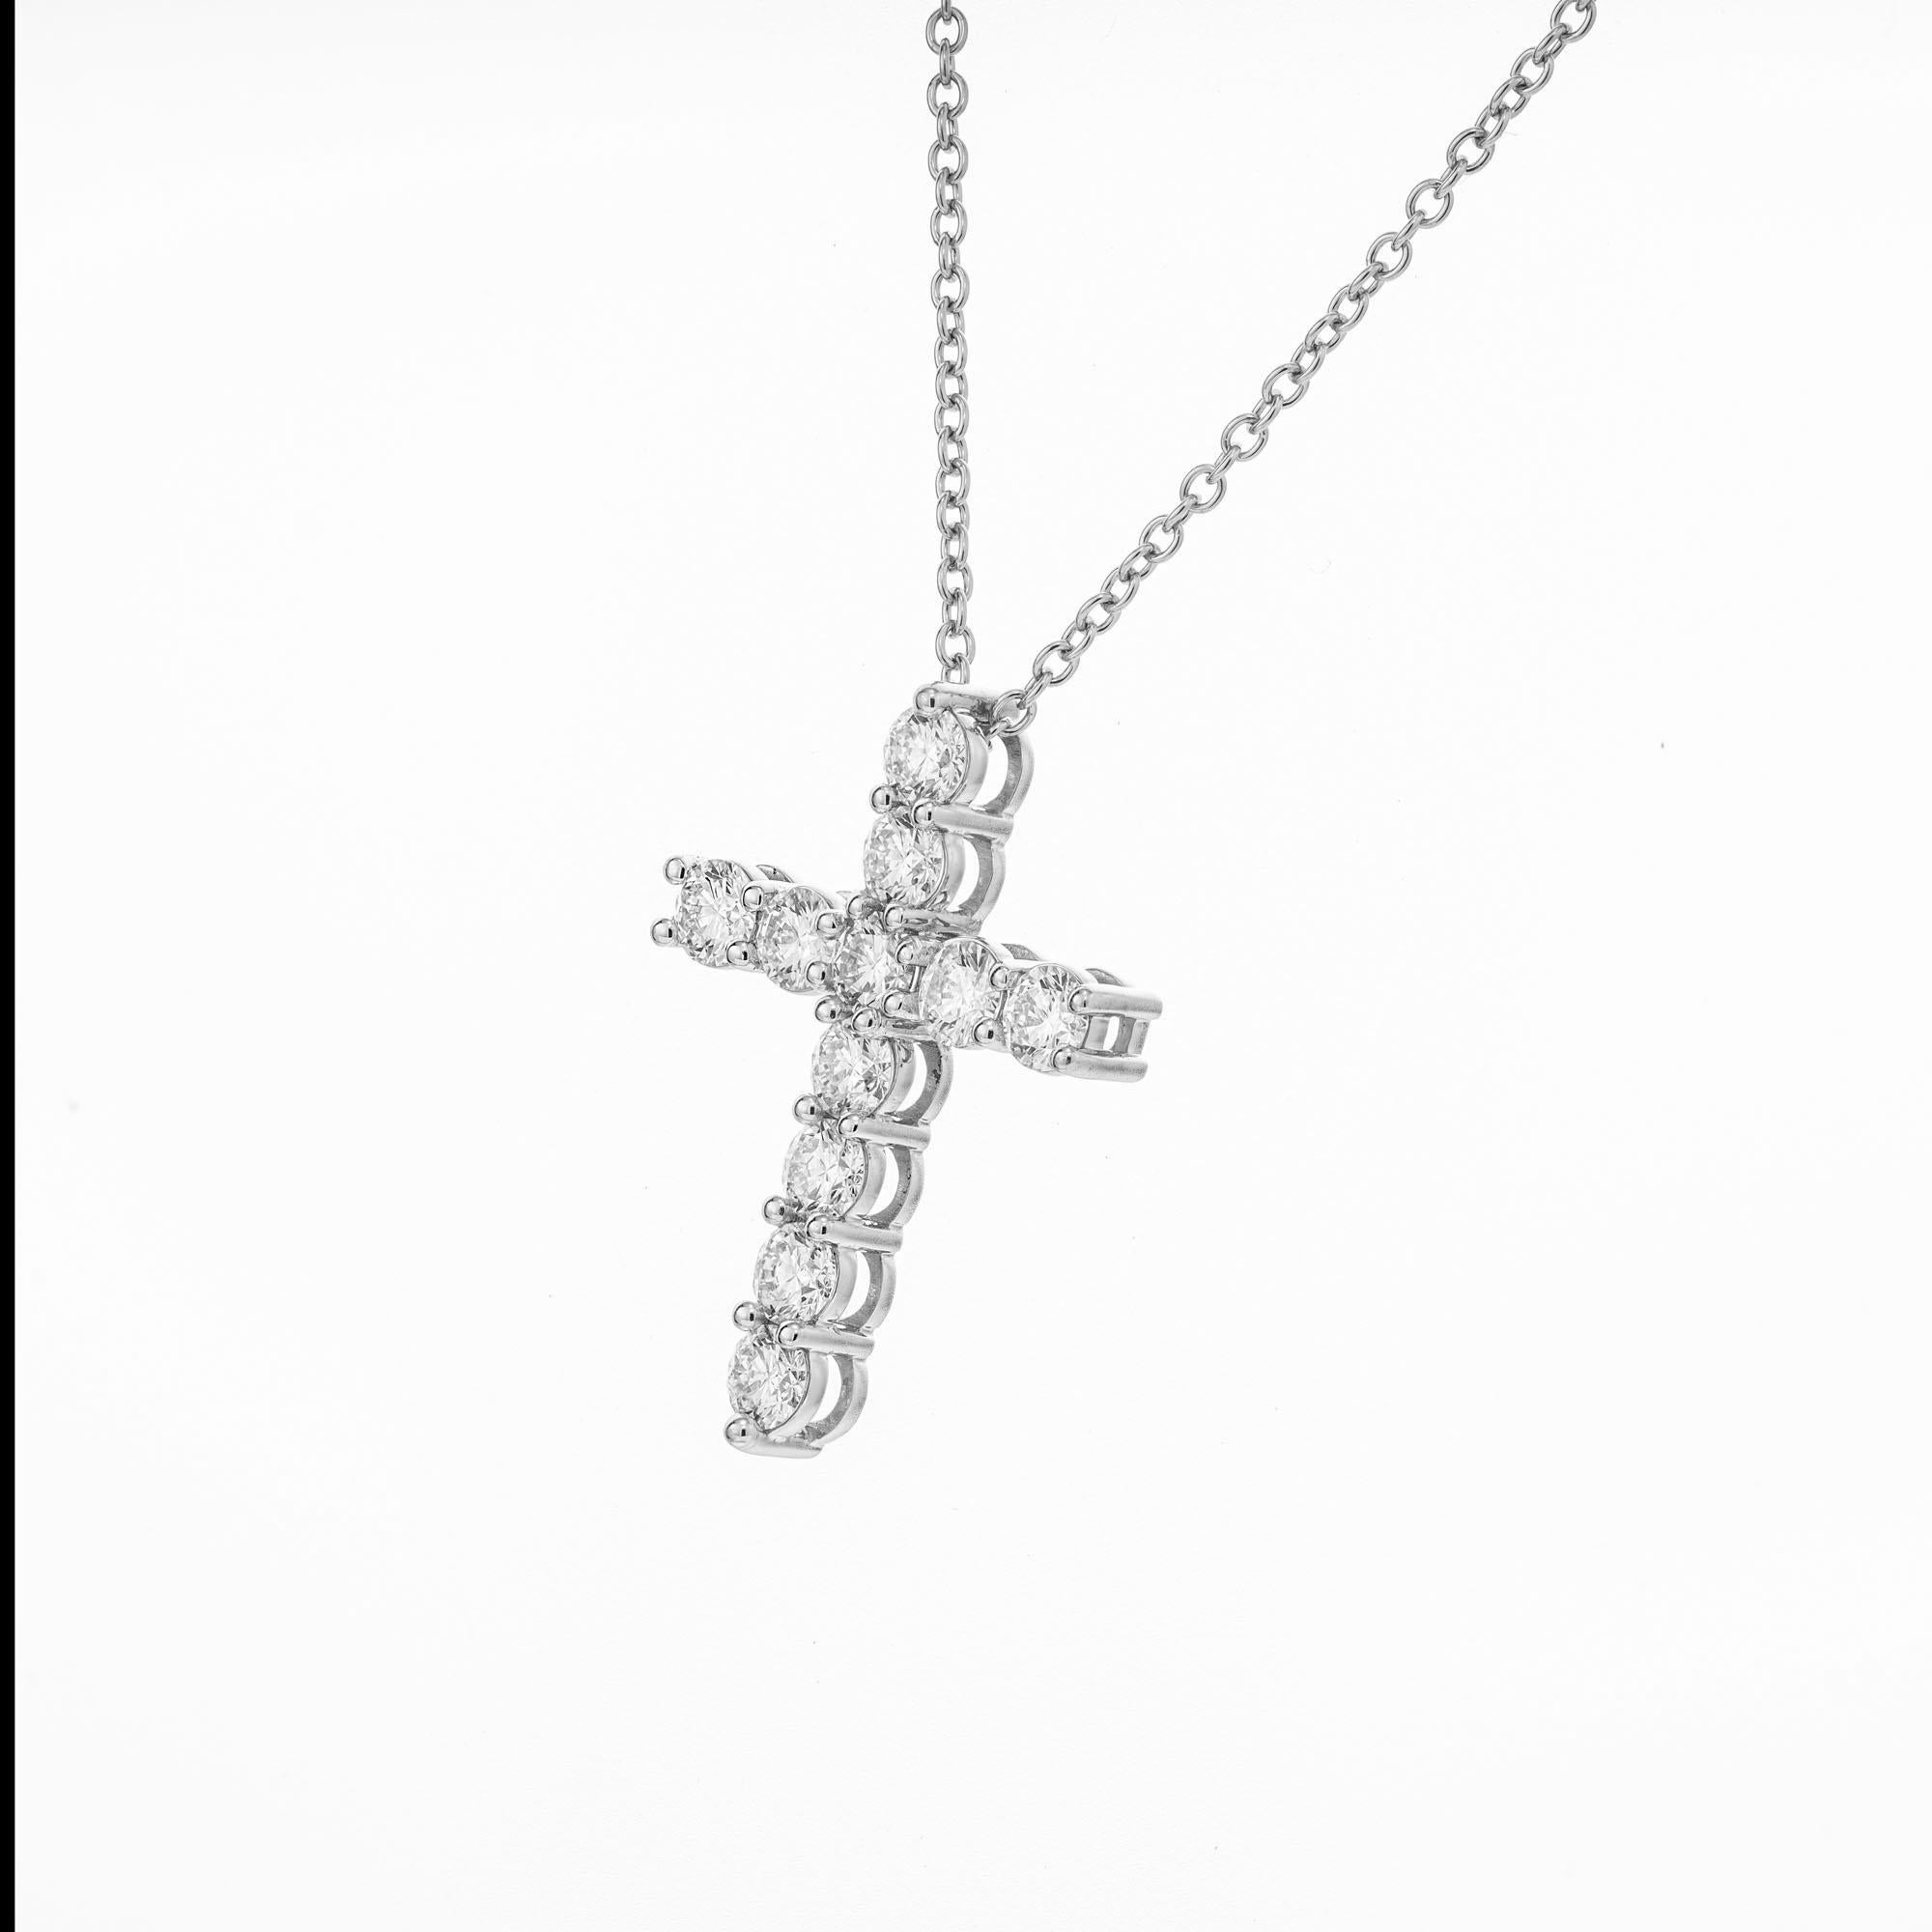 Peter Suchy 1.09 carat brilliant cut 11 diamond cross pendant necklace in platinum. 18 inch length chain.

11 round brilliant cut diamonds, F-G VS approx. 1.09cts
Platinum 
5.3 grams
Chain: 18 Inches- with jump ring at 16 Inches to shorten 
